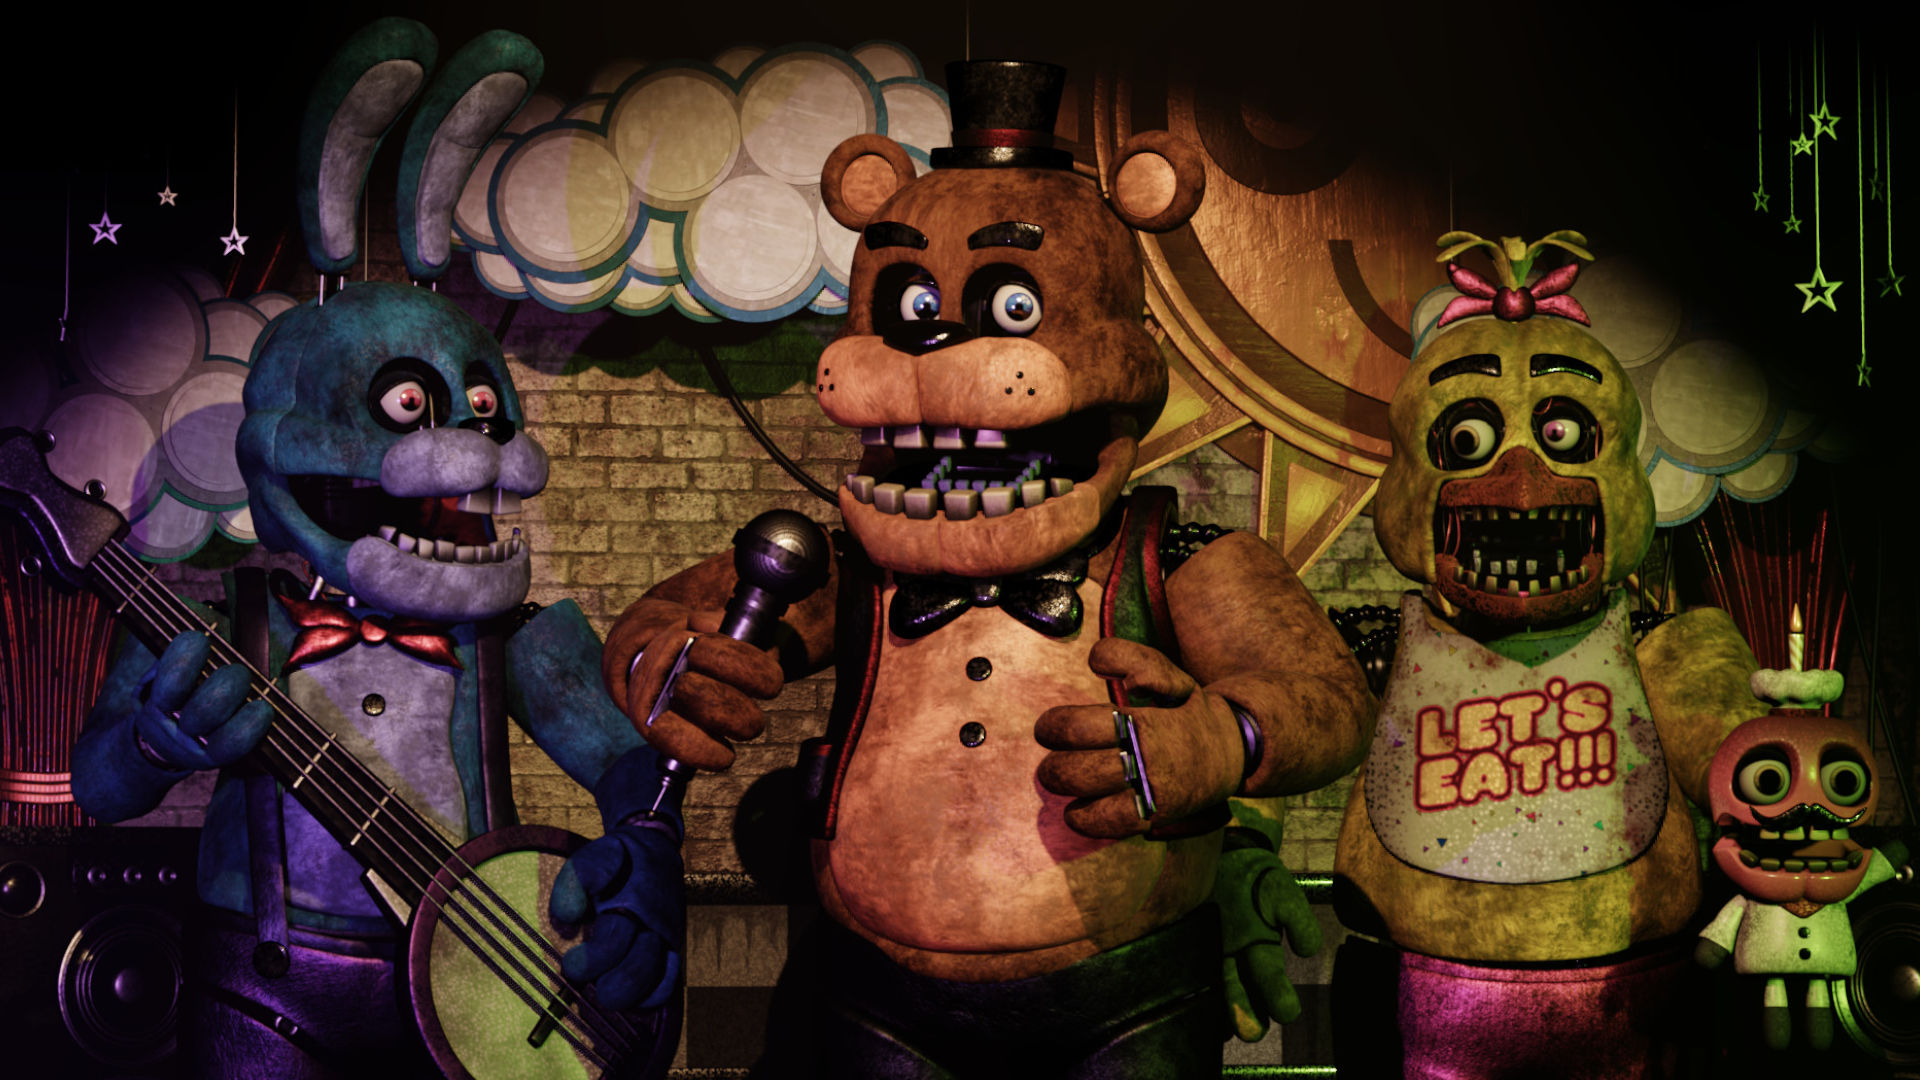 FNAF movie release date, trailer, and more